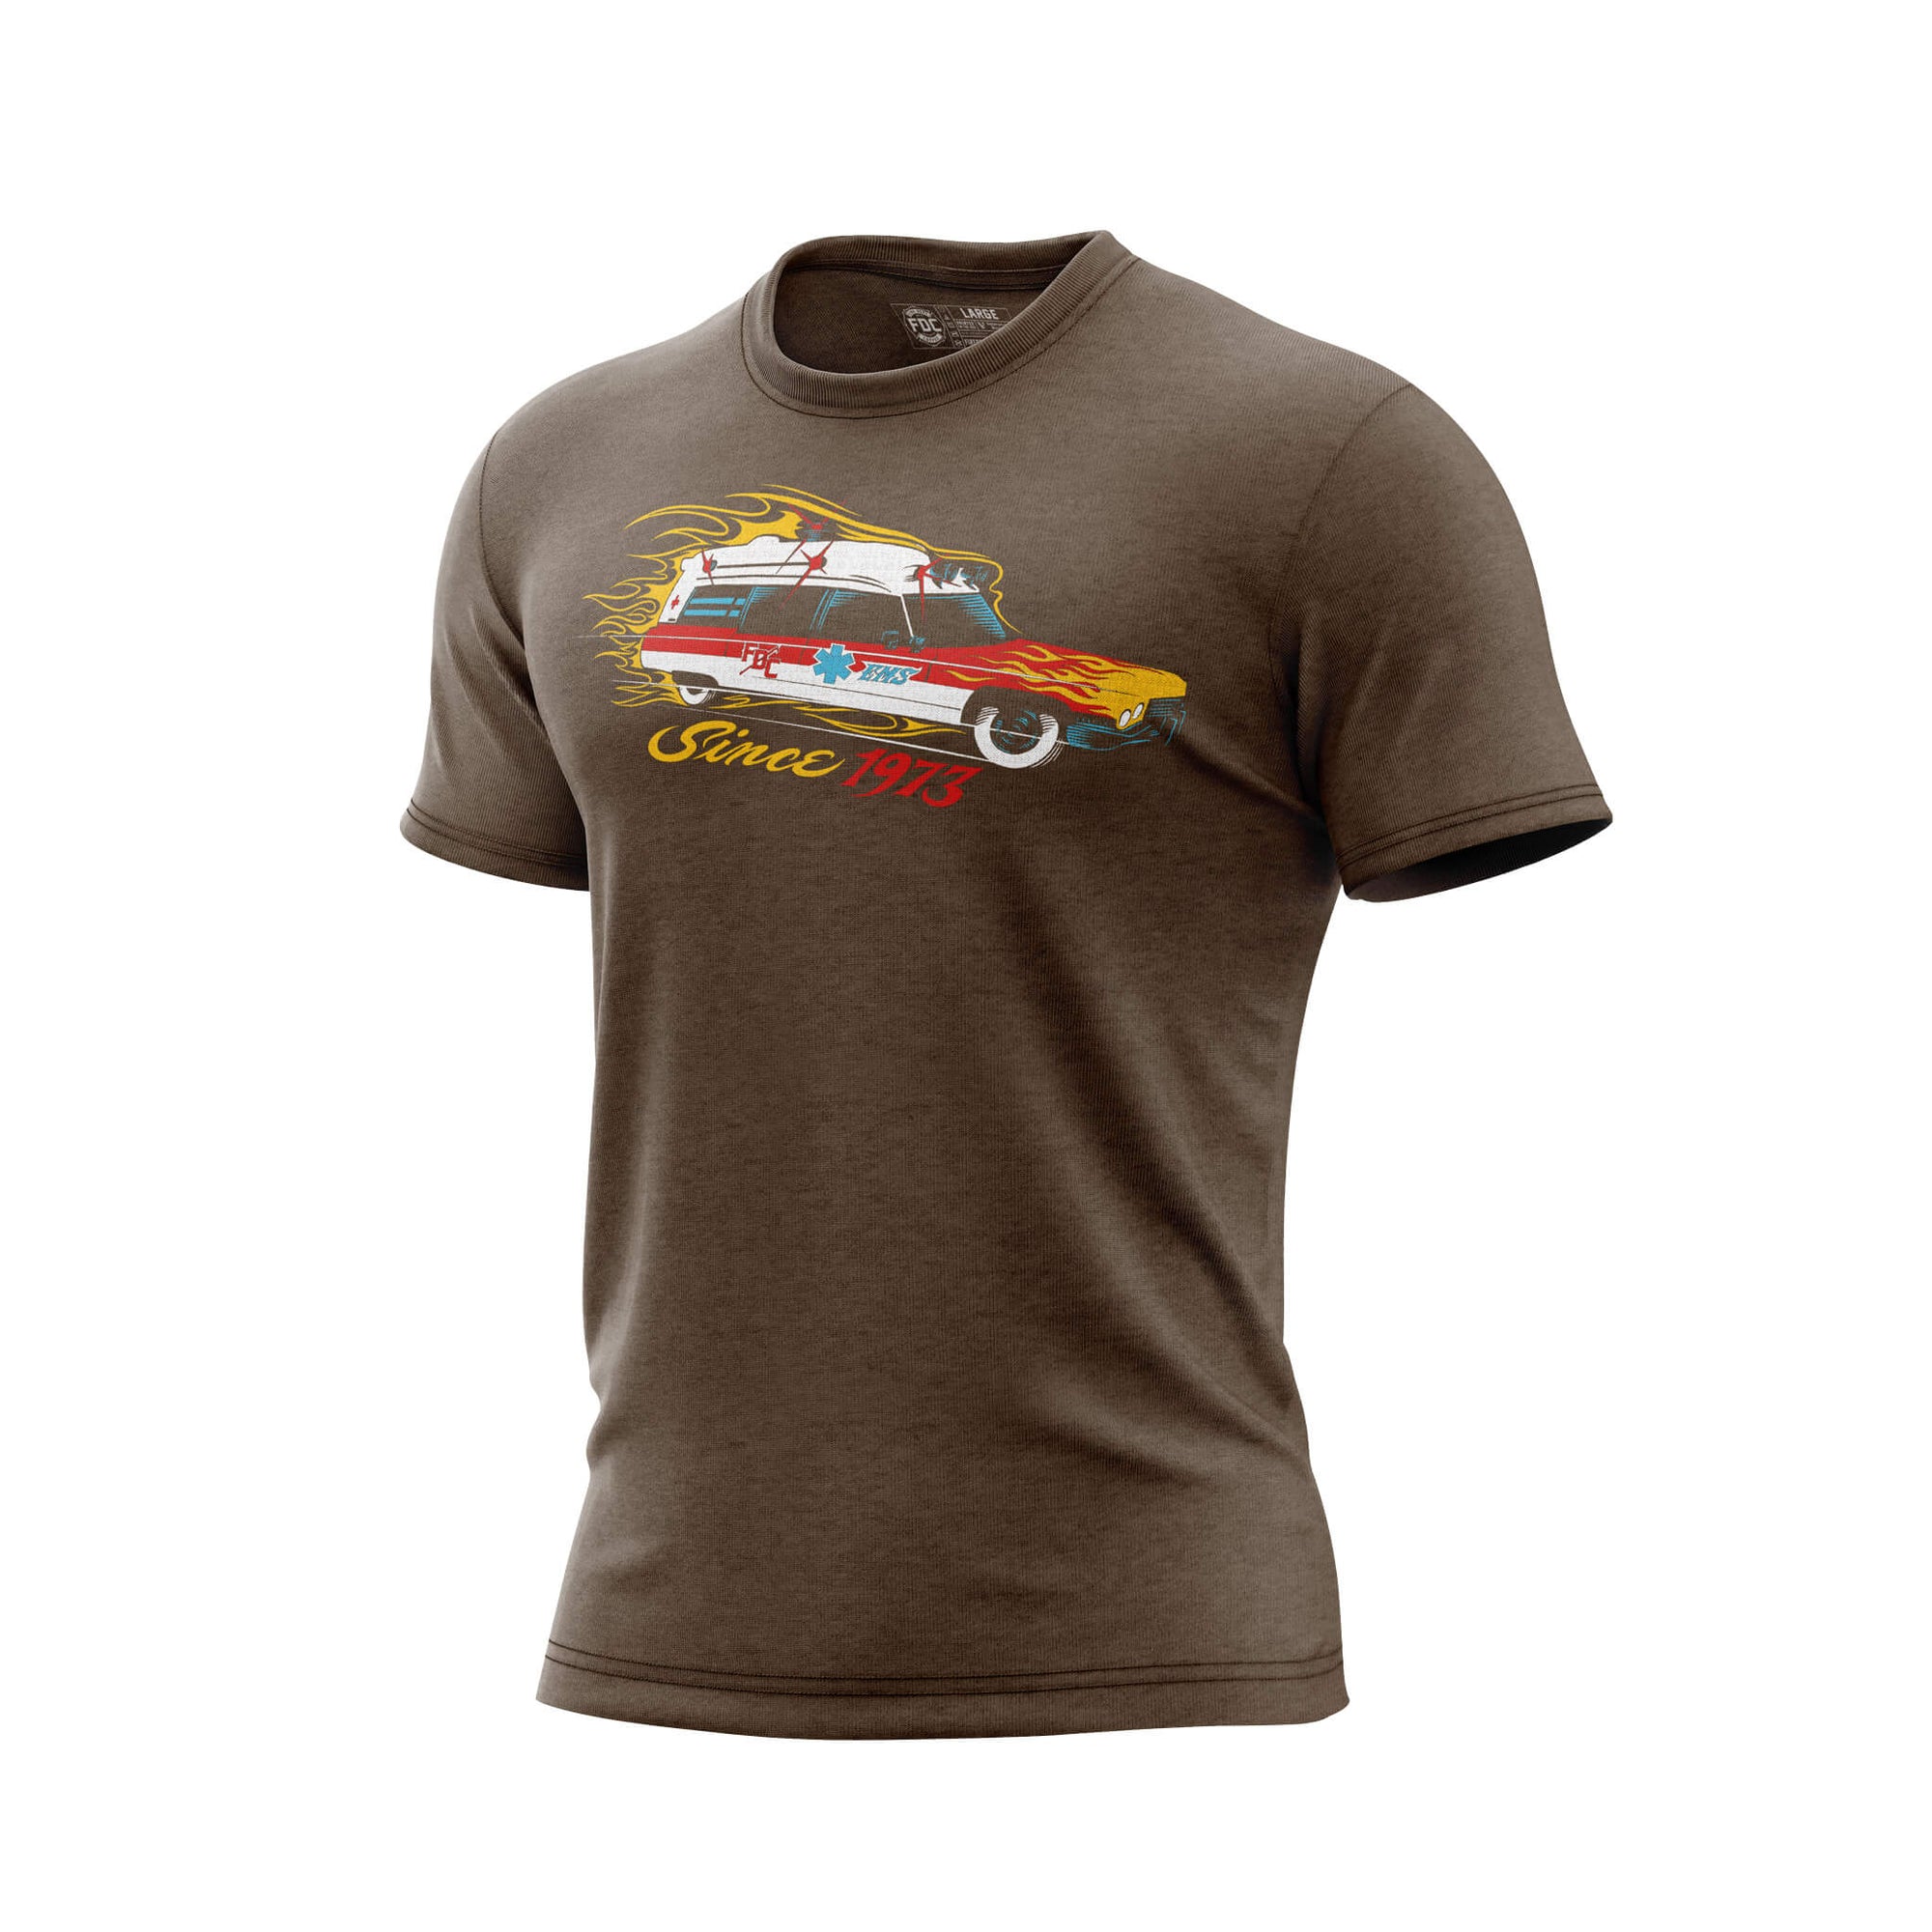 A brown t shirt with a "meat wagon" vehicle on the chest surrounded by flames. Under the vehicle it says "since 1973".